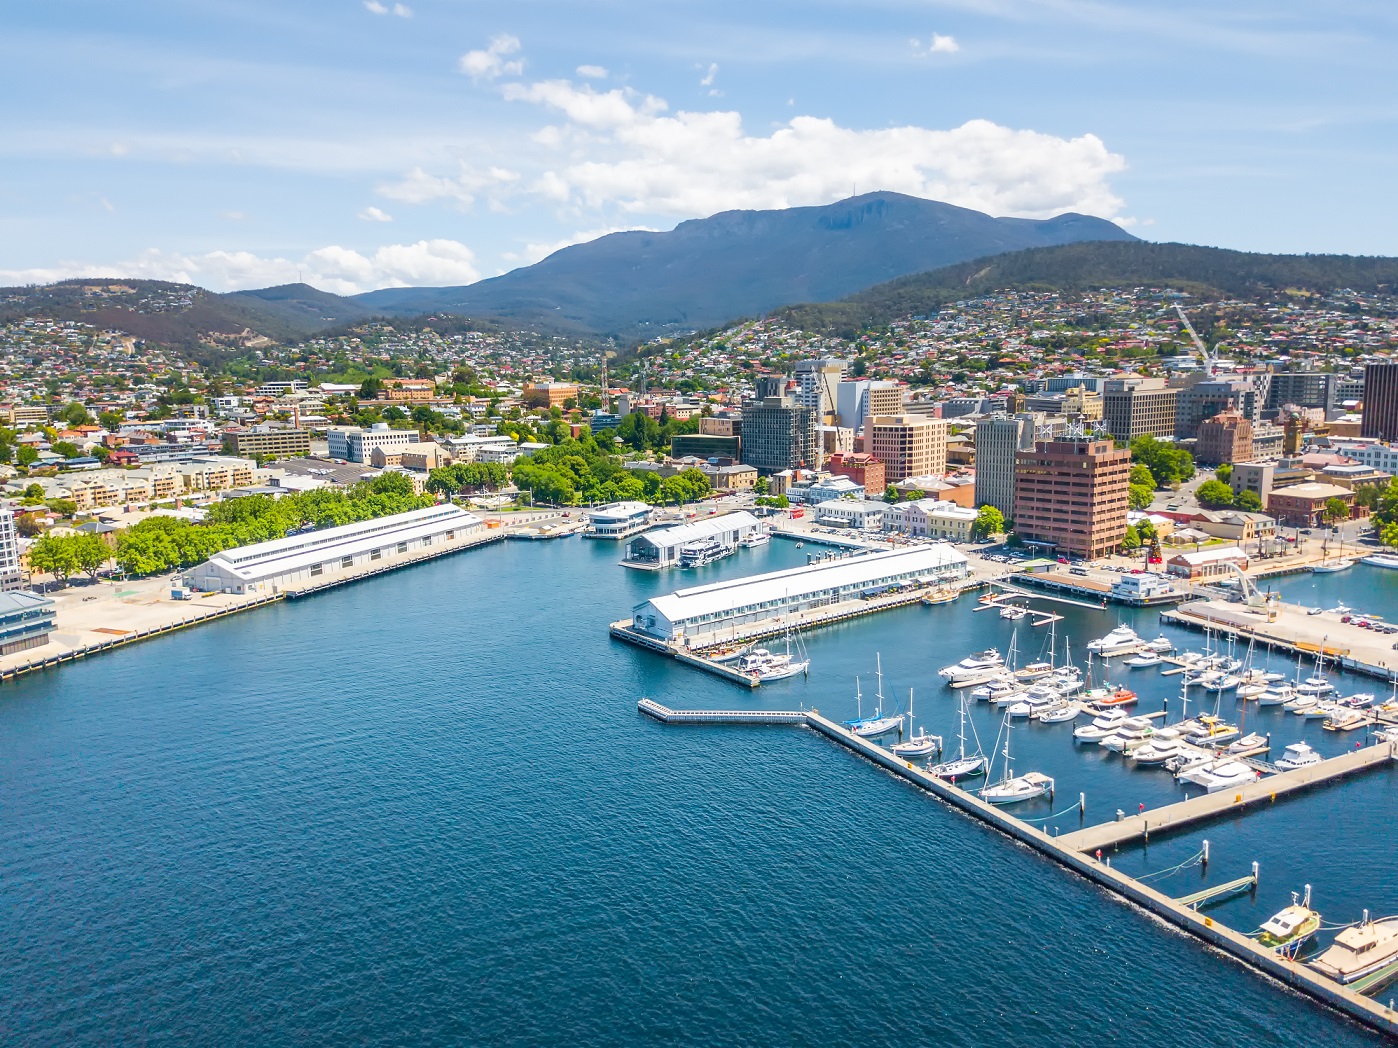 About Hobart